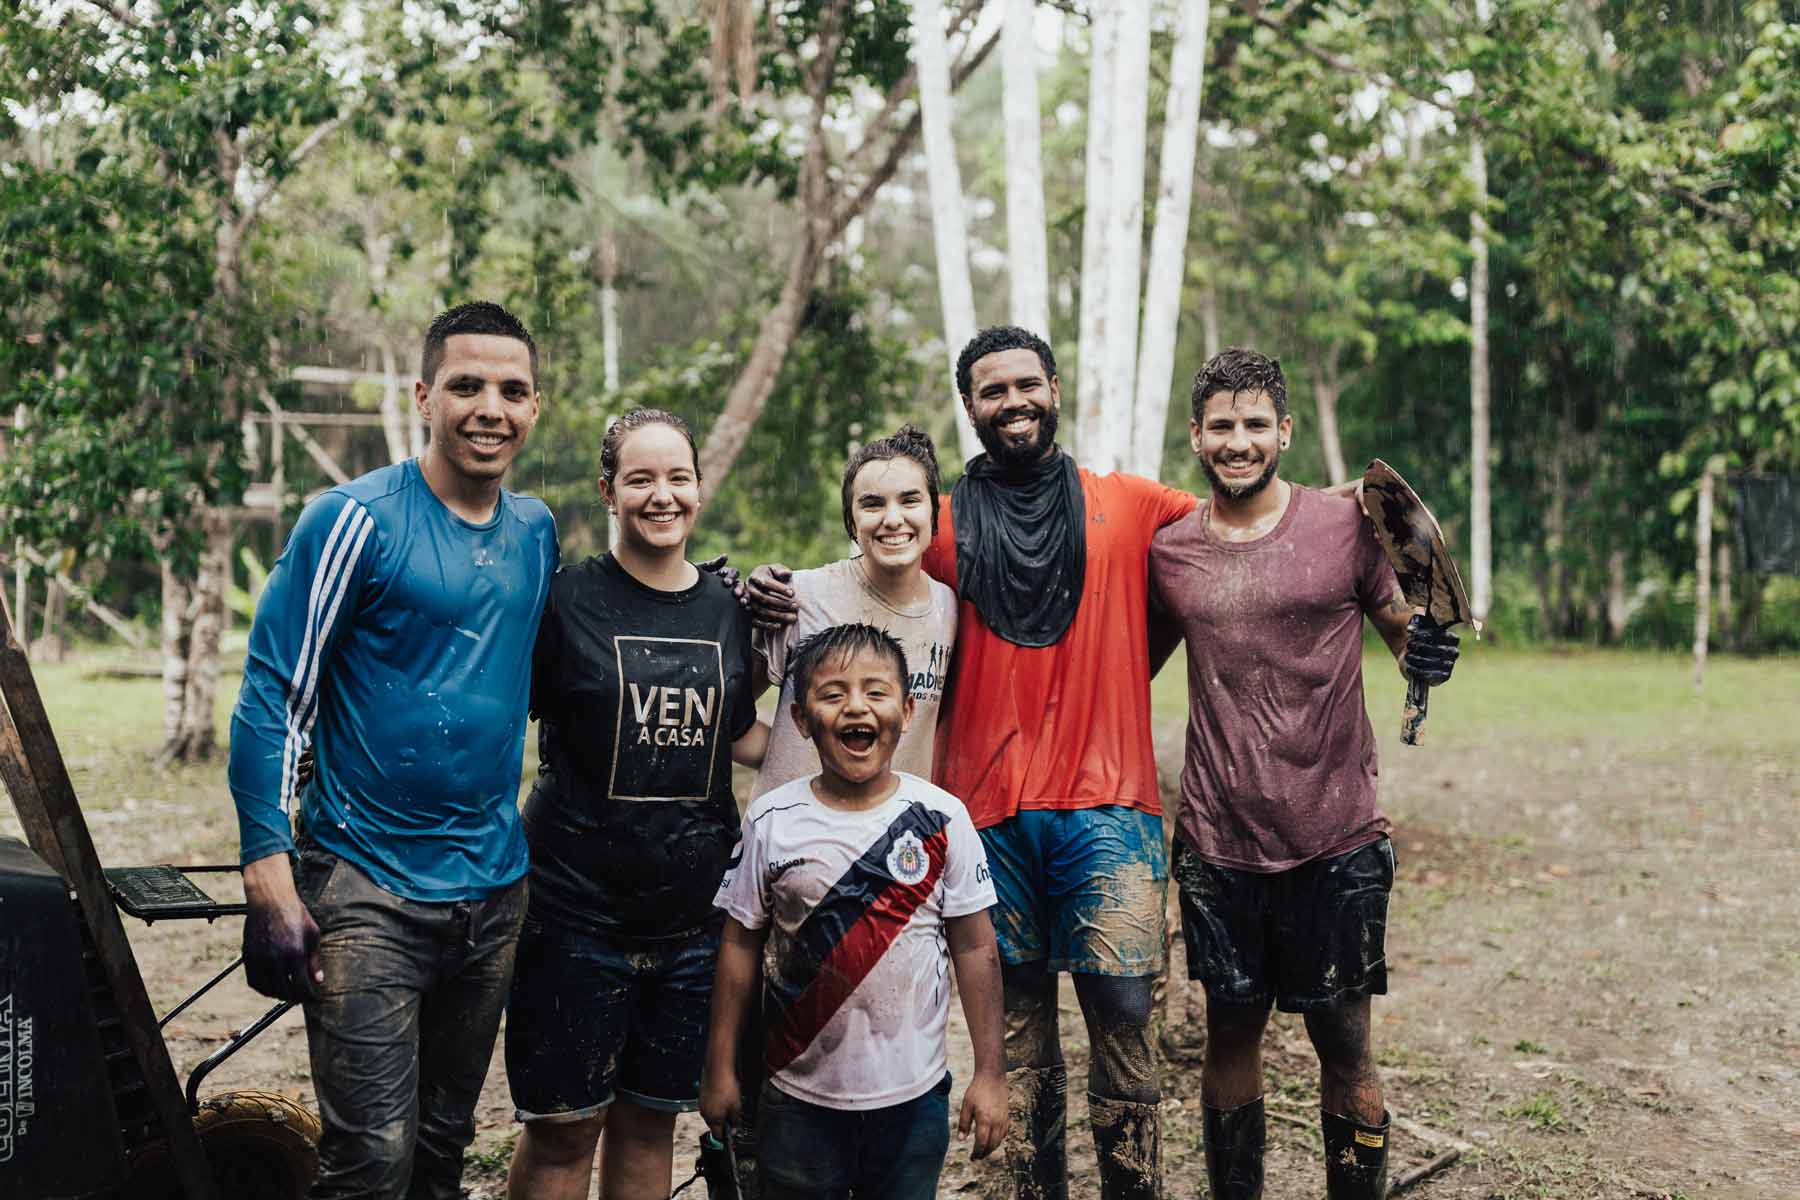 YWAM missionaries smiling in the rain while on outreach in the Amazon jungle